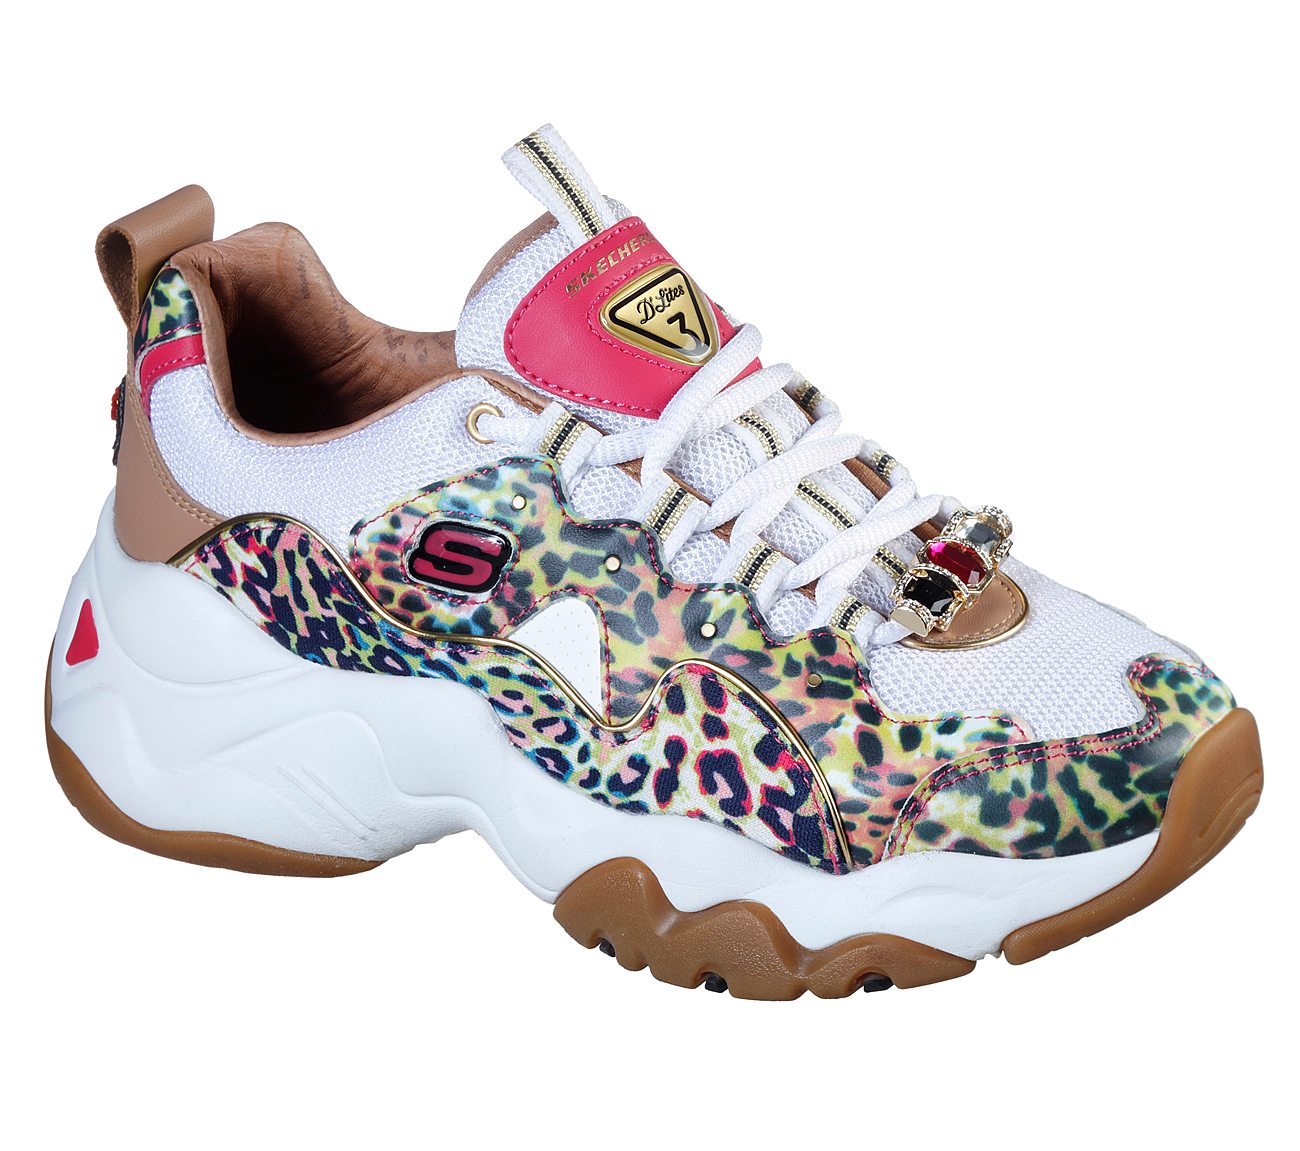 Skechers has just launched four stunning new styles of 